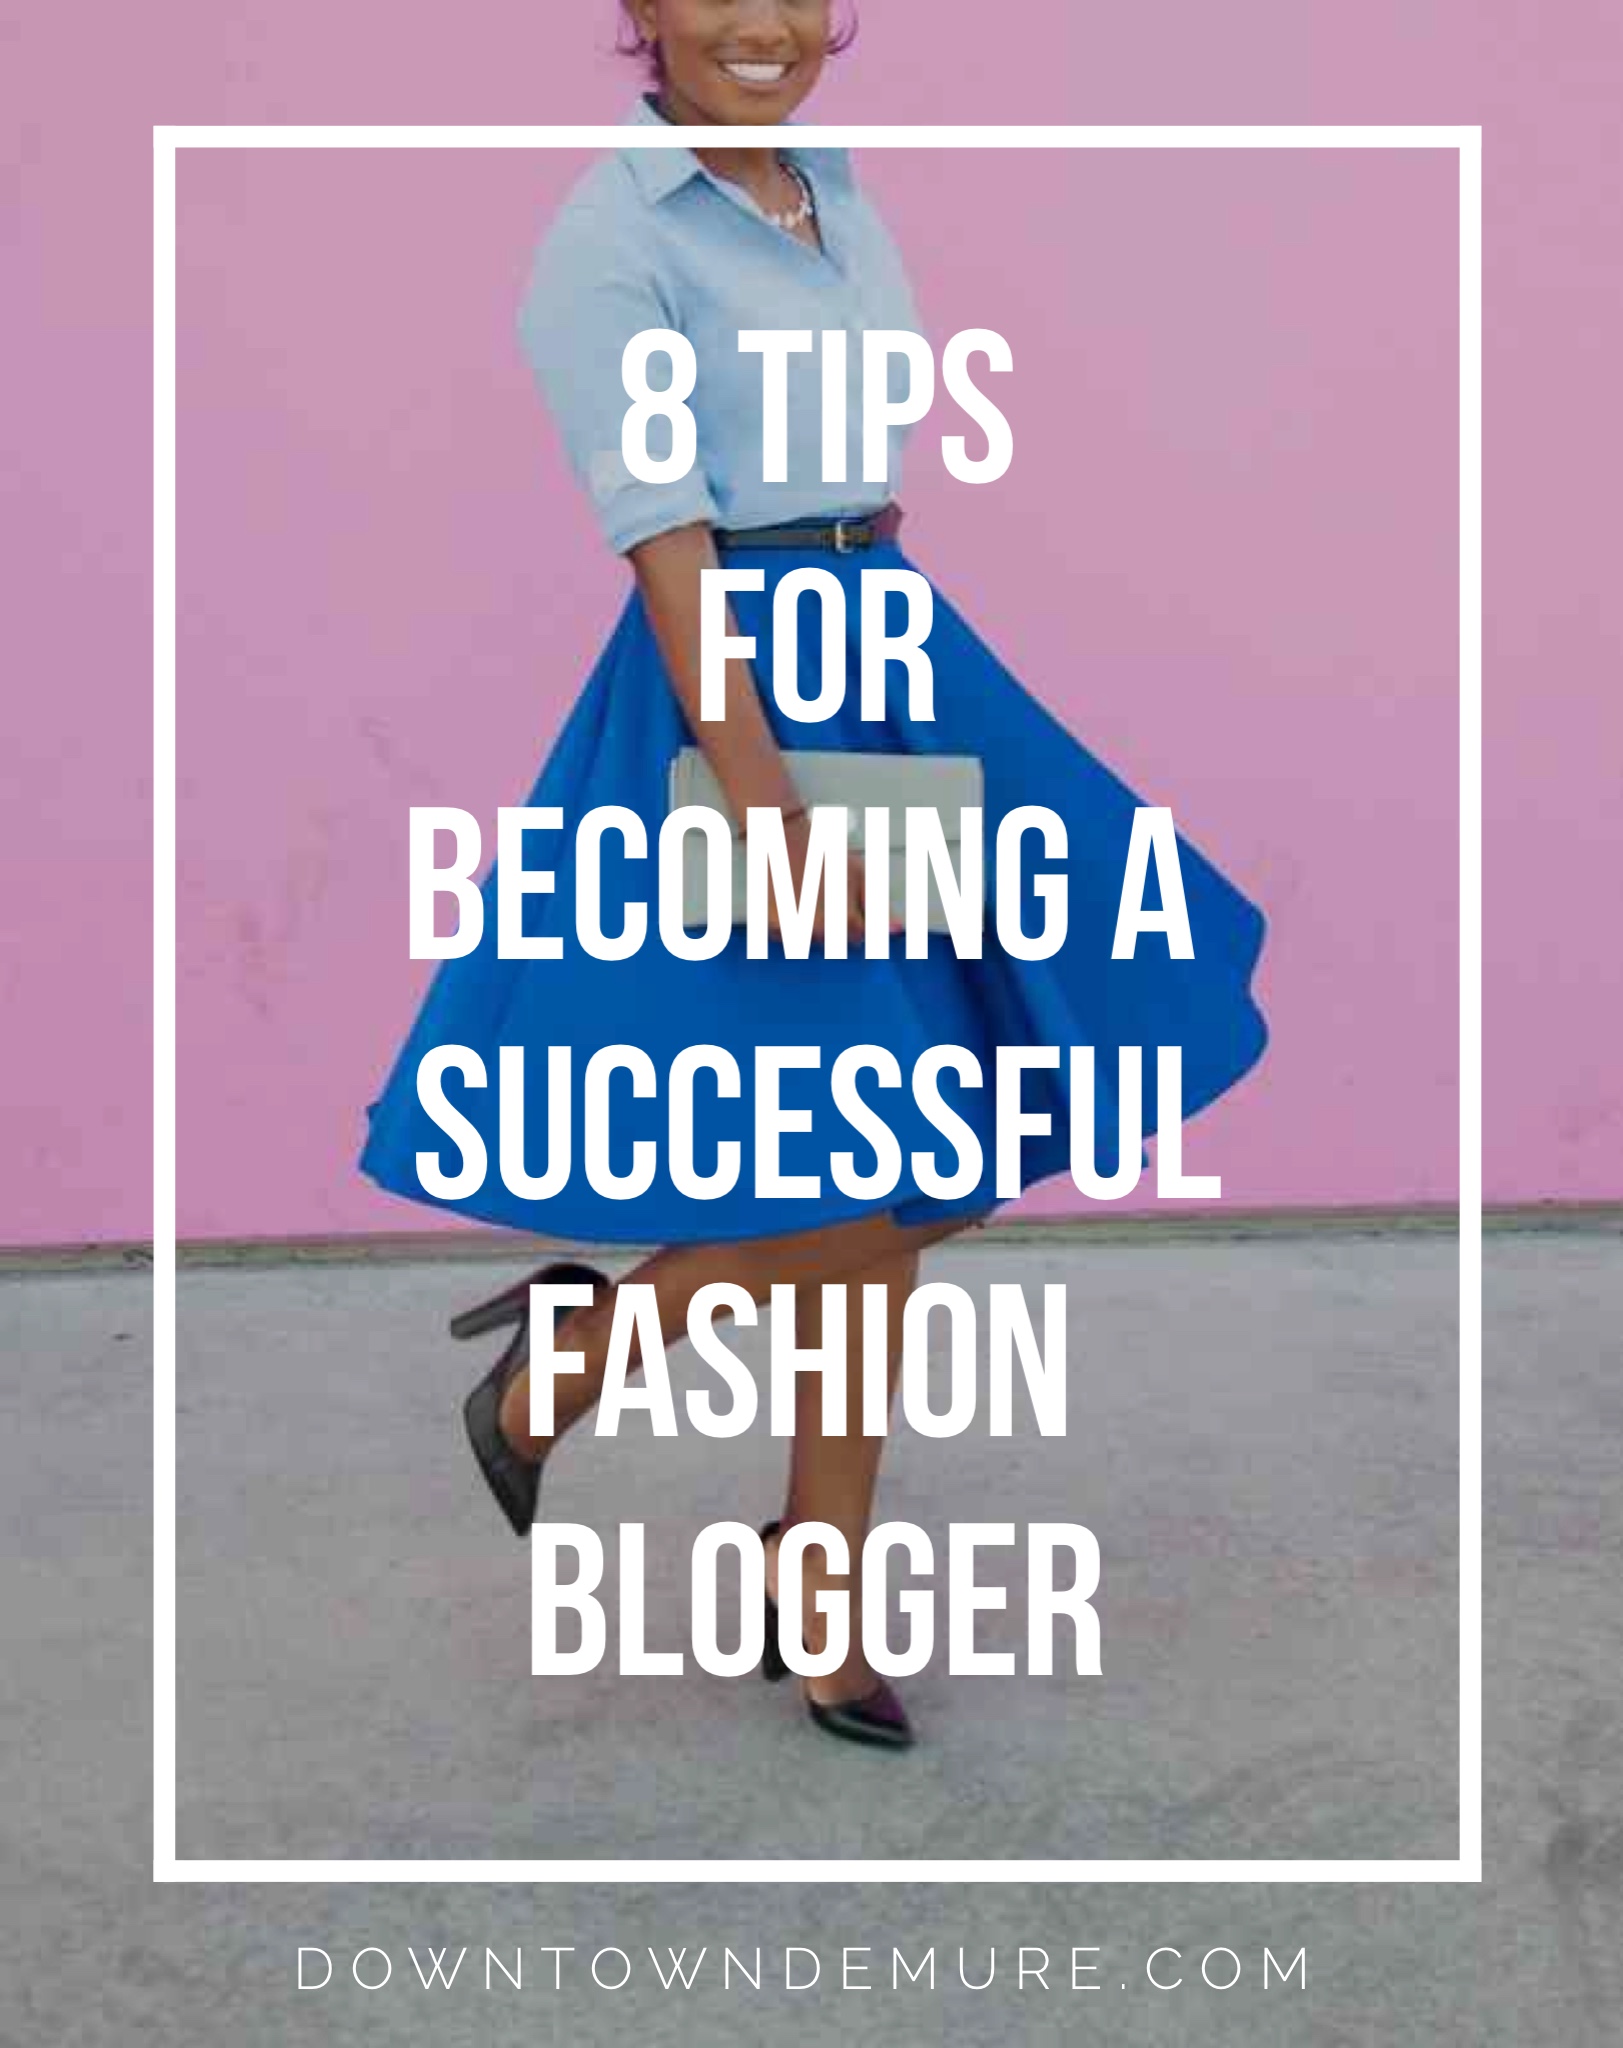 Tips on how to become a successful fashion blogger from modest fashion blogger Downtown Demure